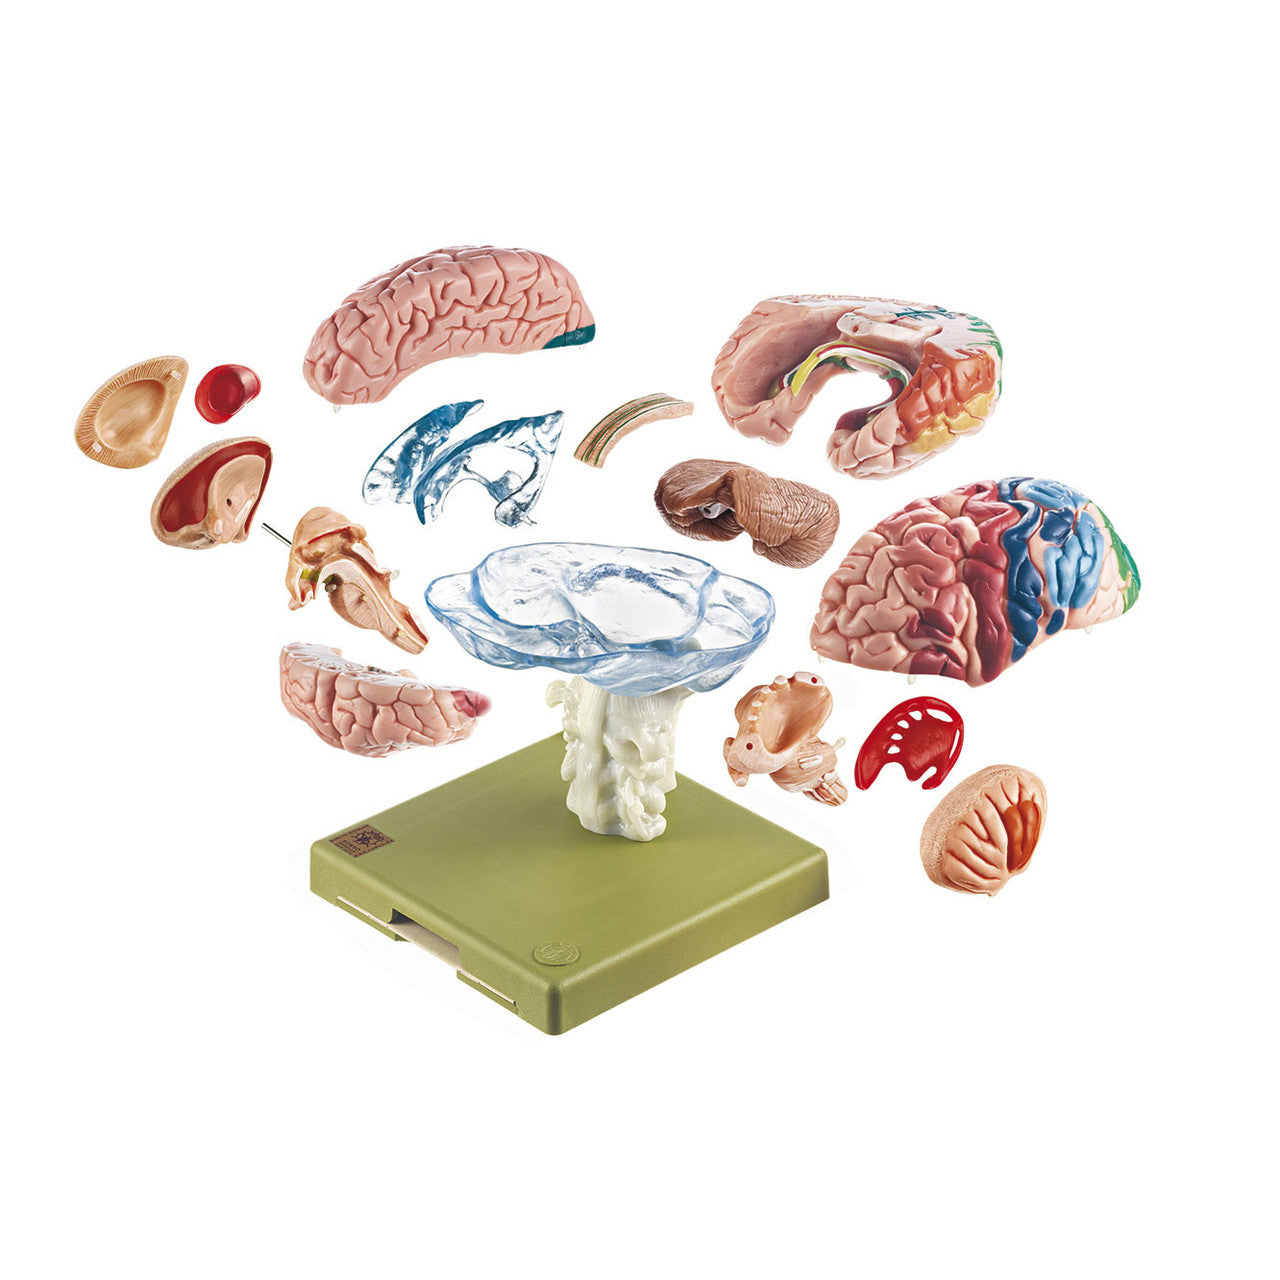 Model of Brain with Indicated Cytoarchitectural Areas Somso Bs 25/1